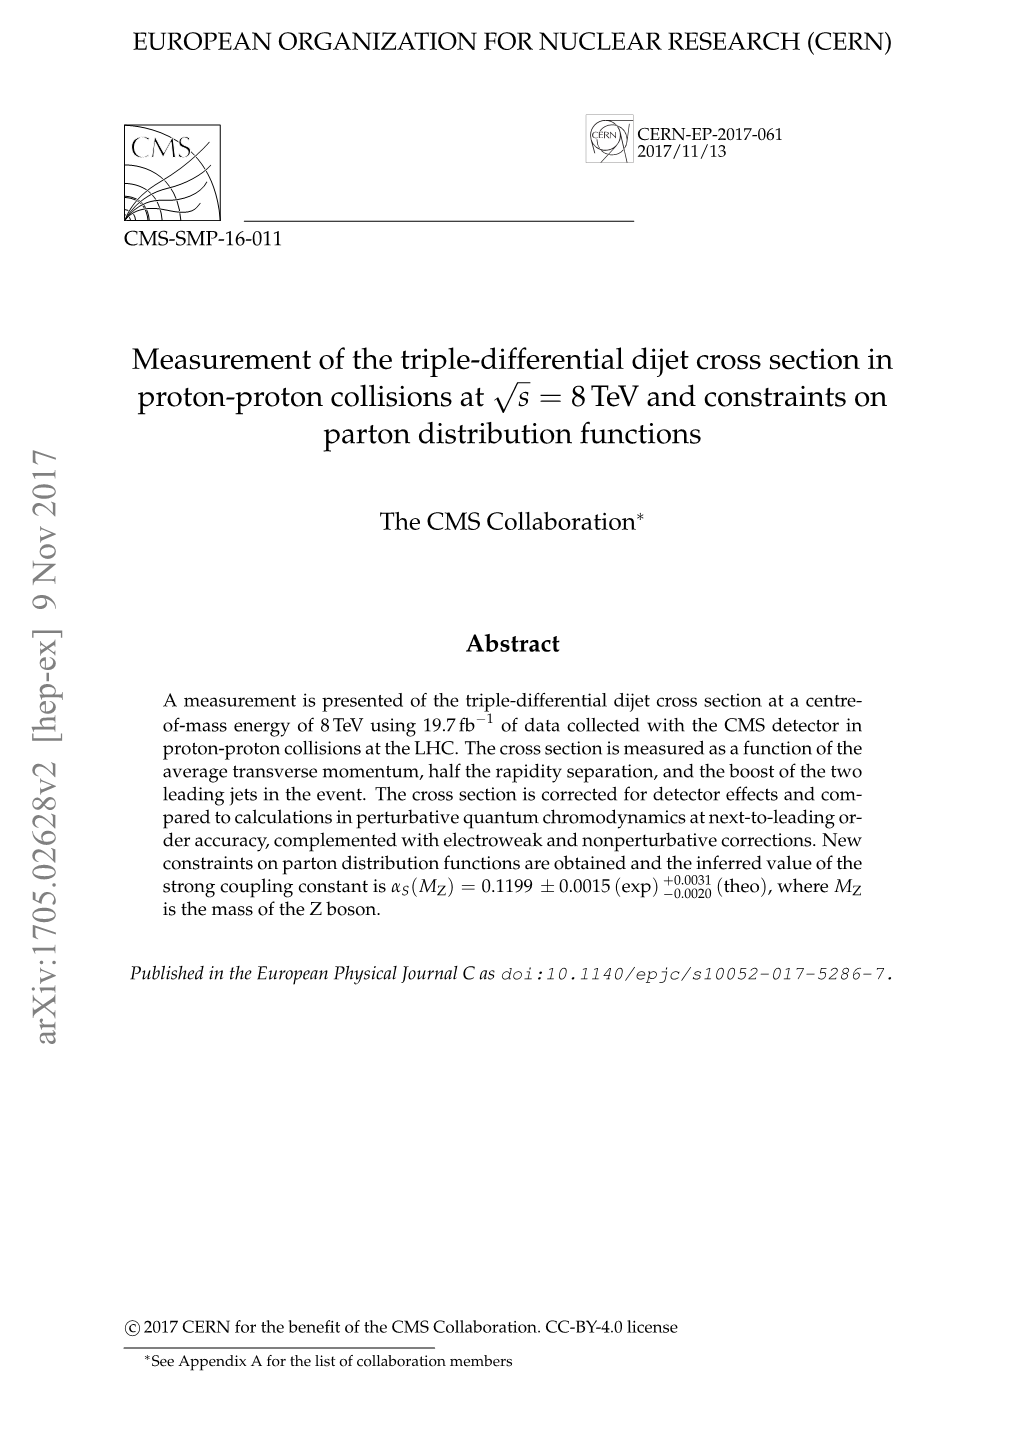 Measurement of the Triple-Differential Dijet Cross Section in Proton-Proton Collisions at √S = 8 Tev and Constraints on Parton Distribution Functions